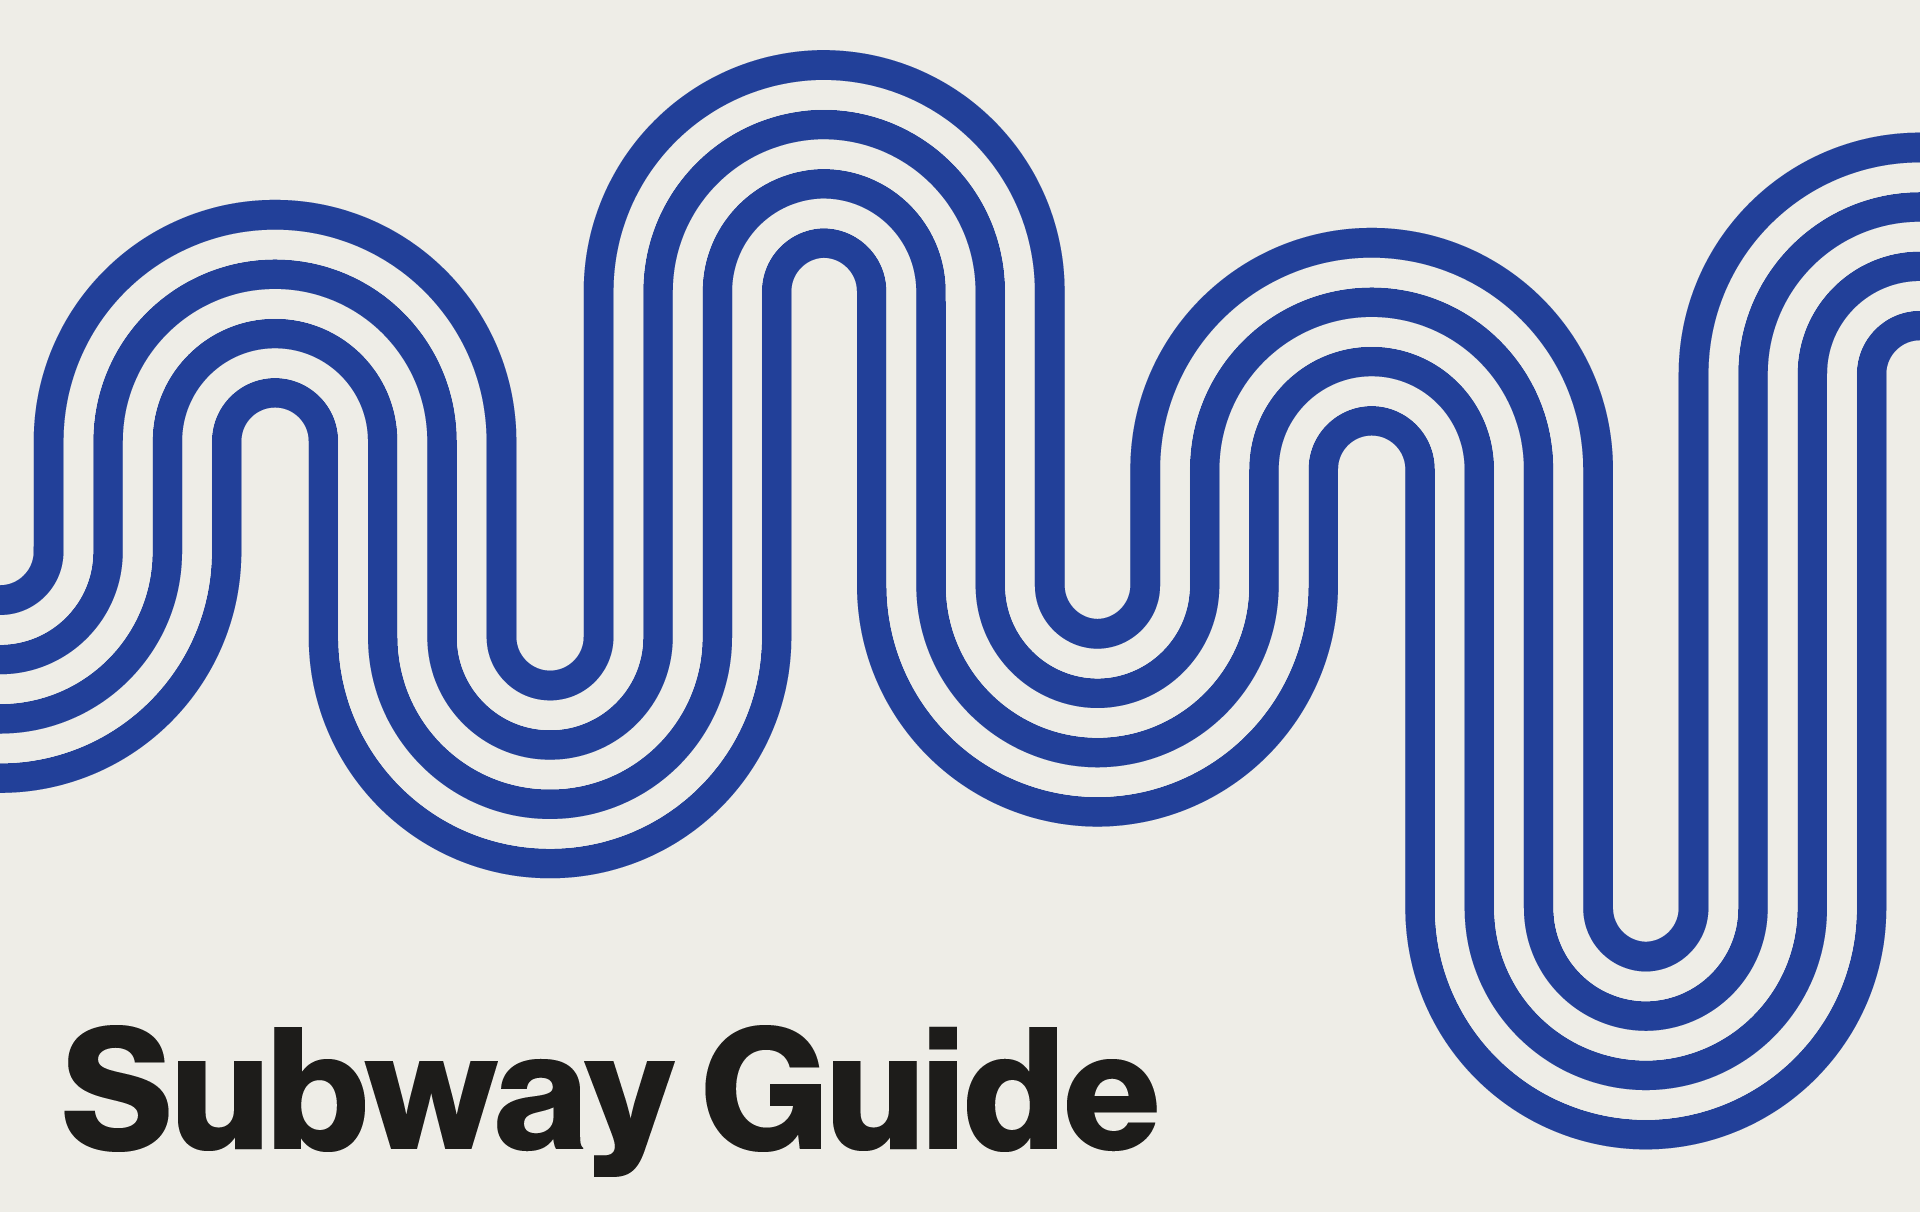 Blue spiraled graphic with "Subway Guide" label